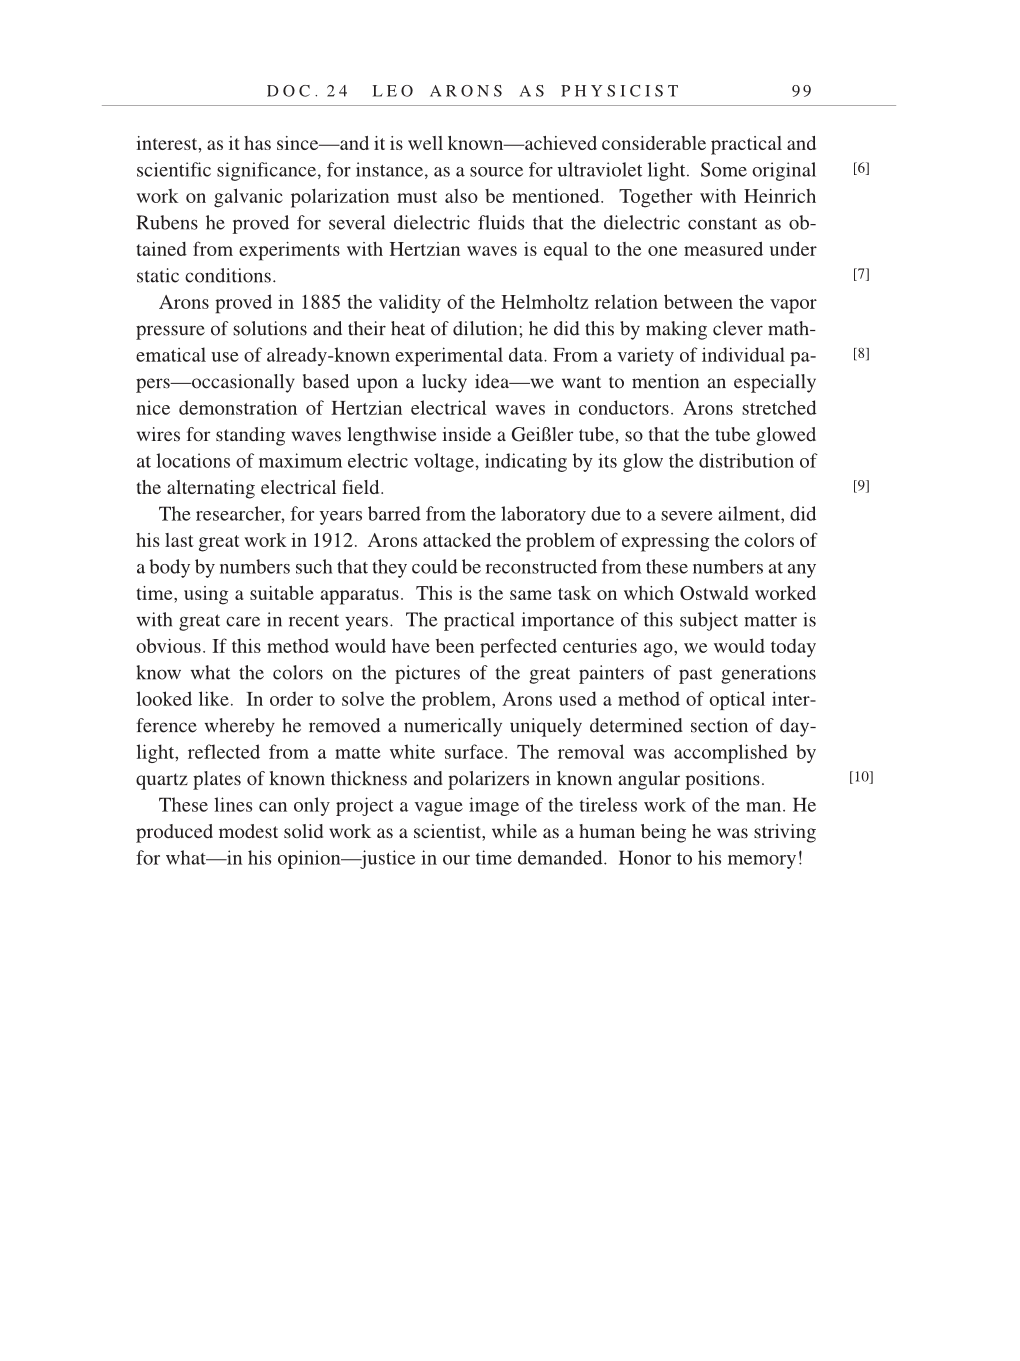 Volume 7: The Berlin Years: Writings, 1918-1921 (English translation supplement) page 99